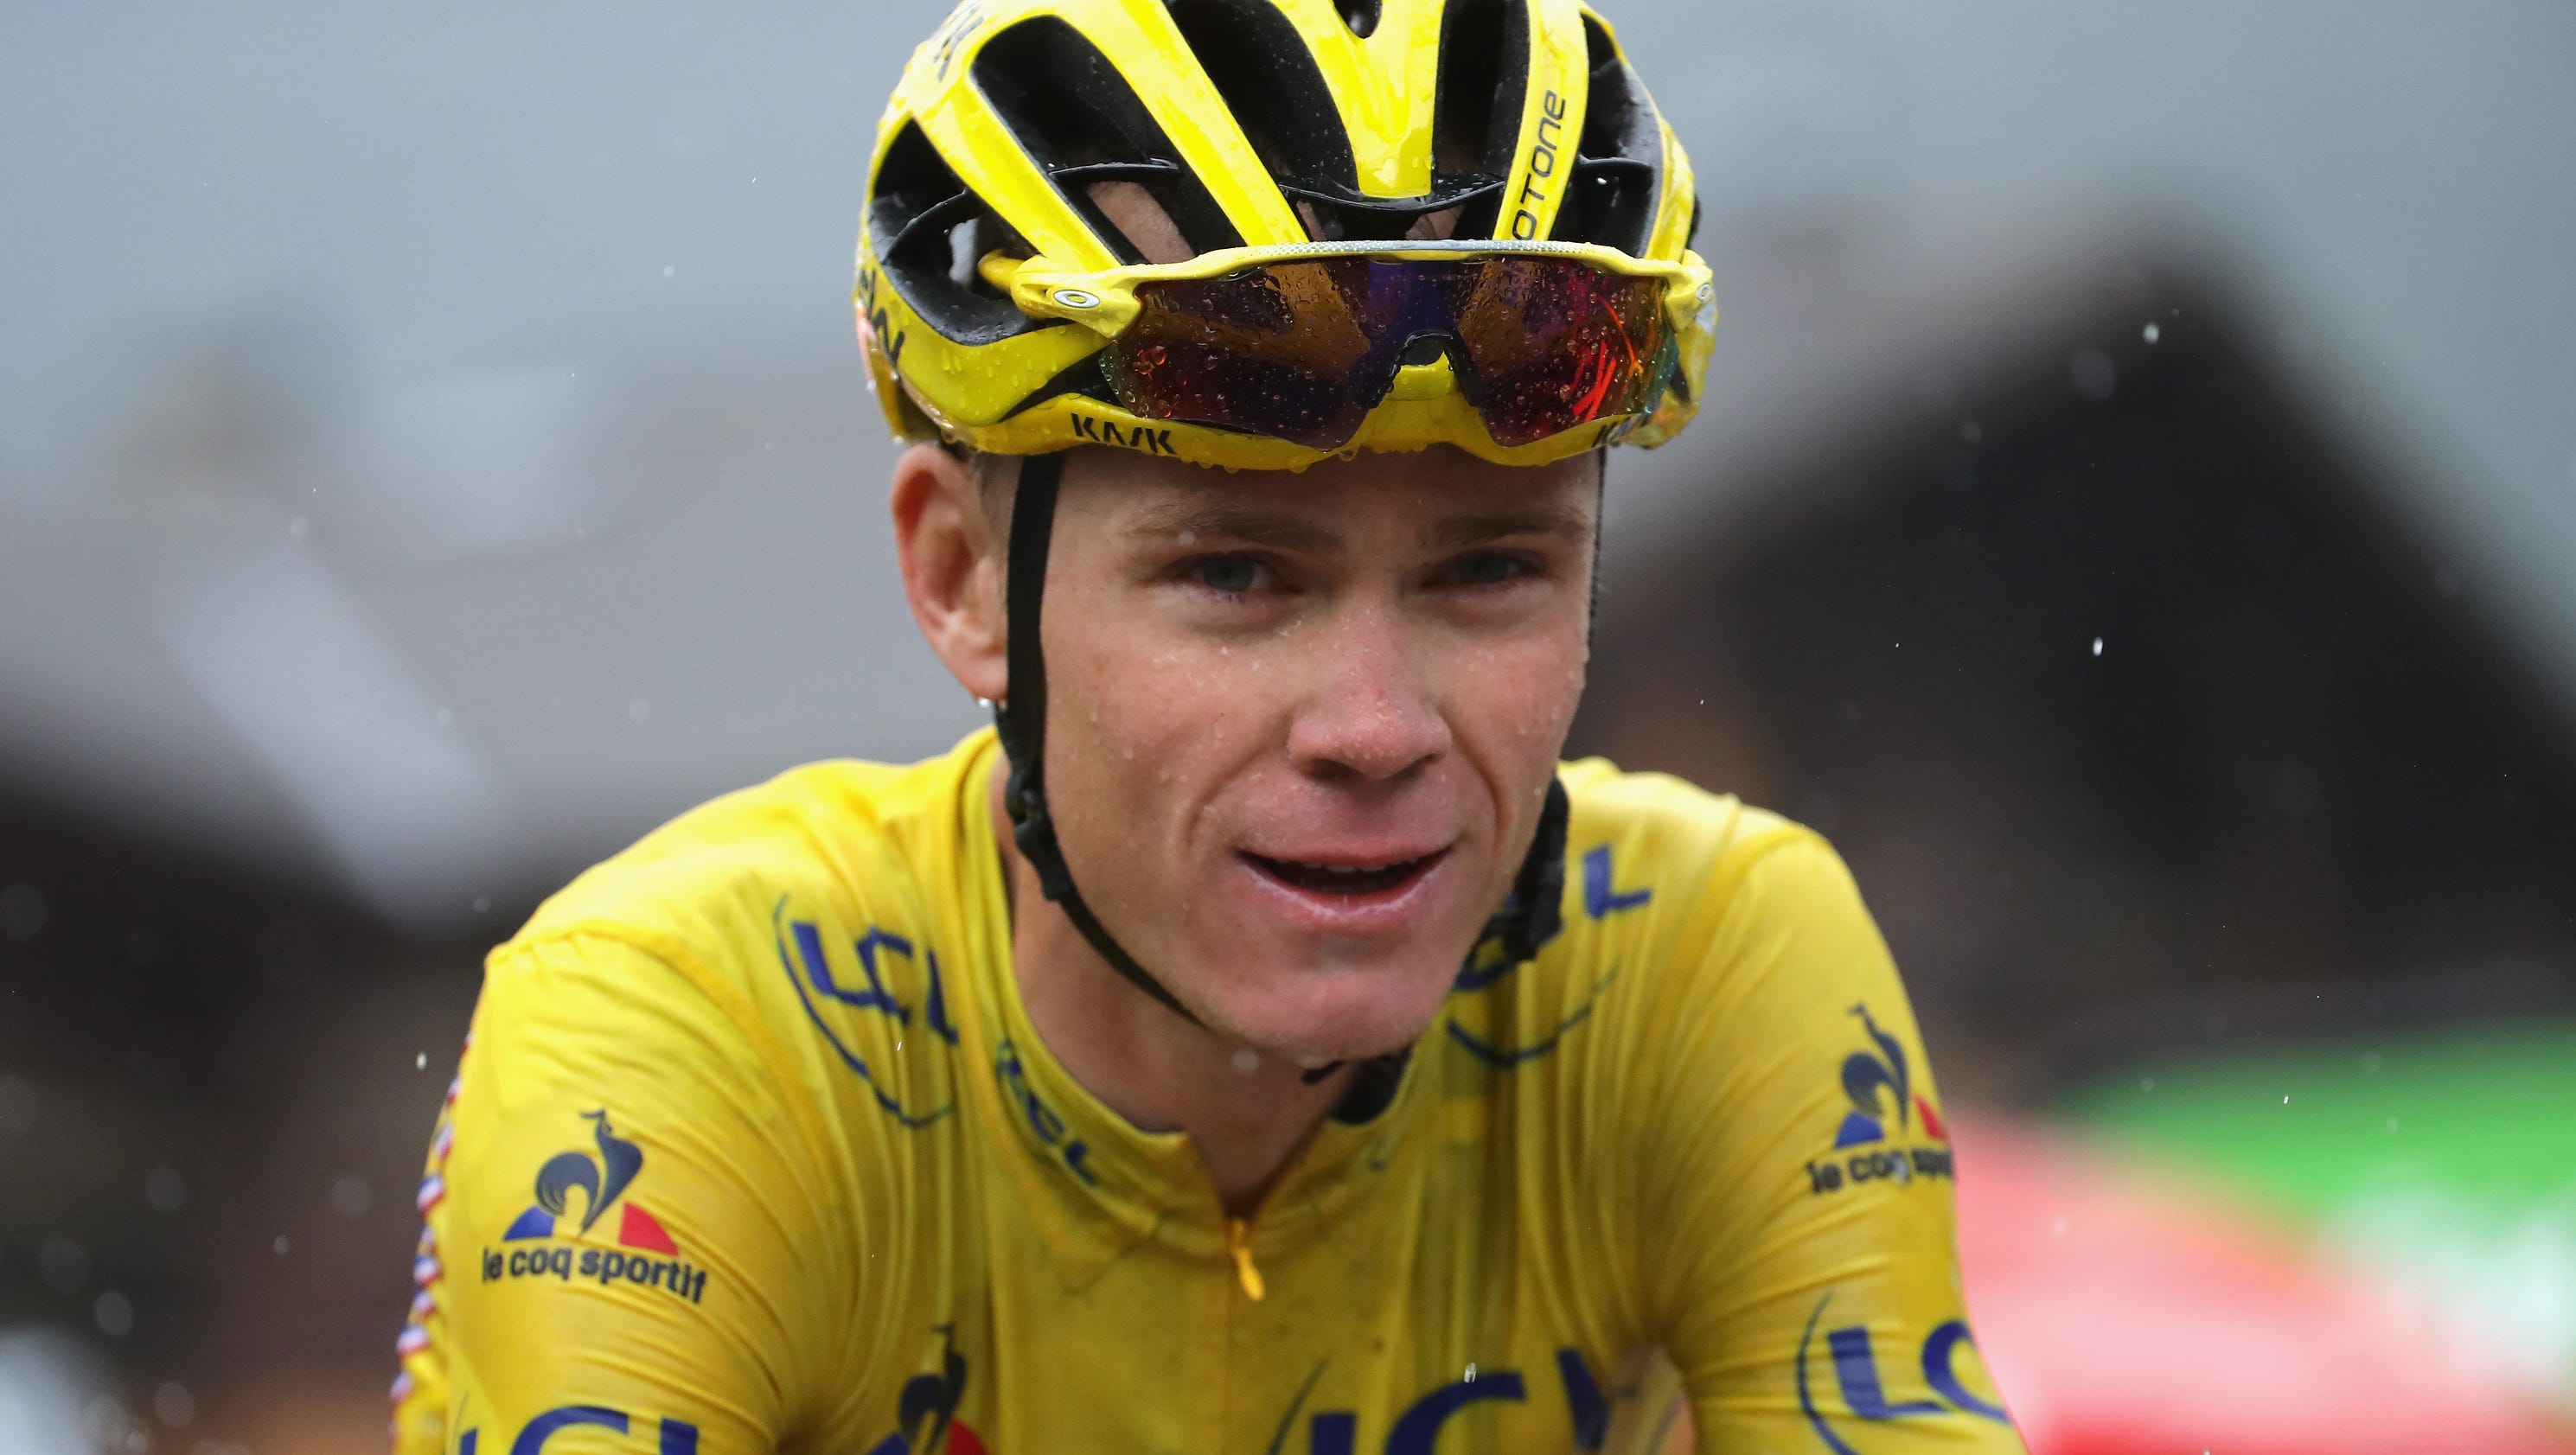 Chris Froome keeps lead intact, set to secure third Tour de France title